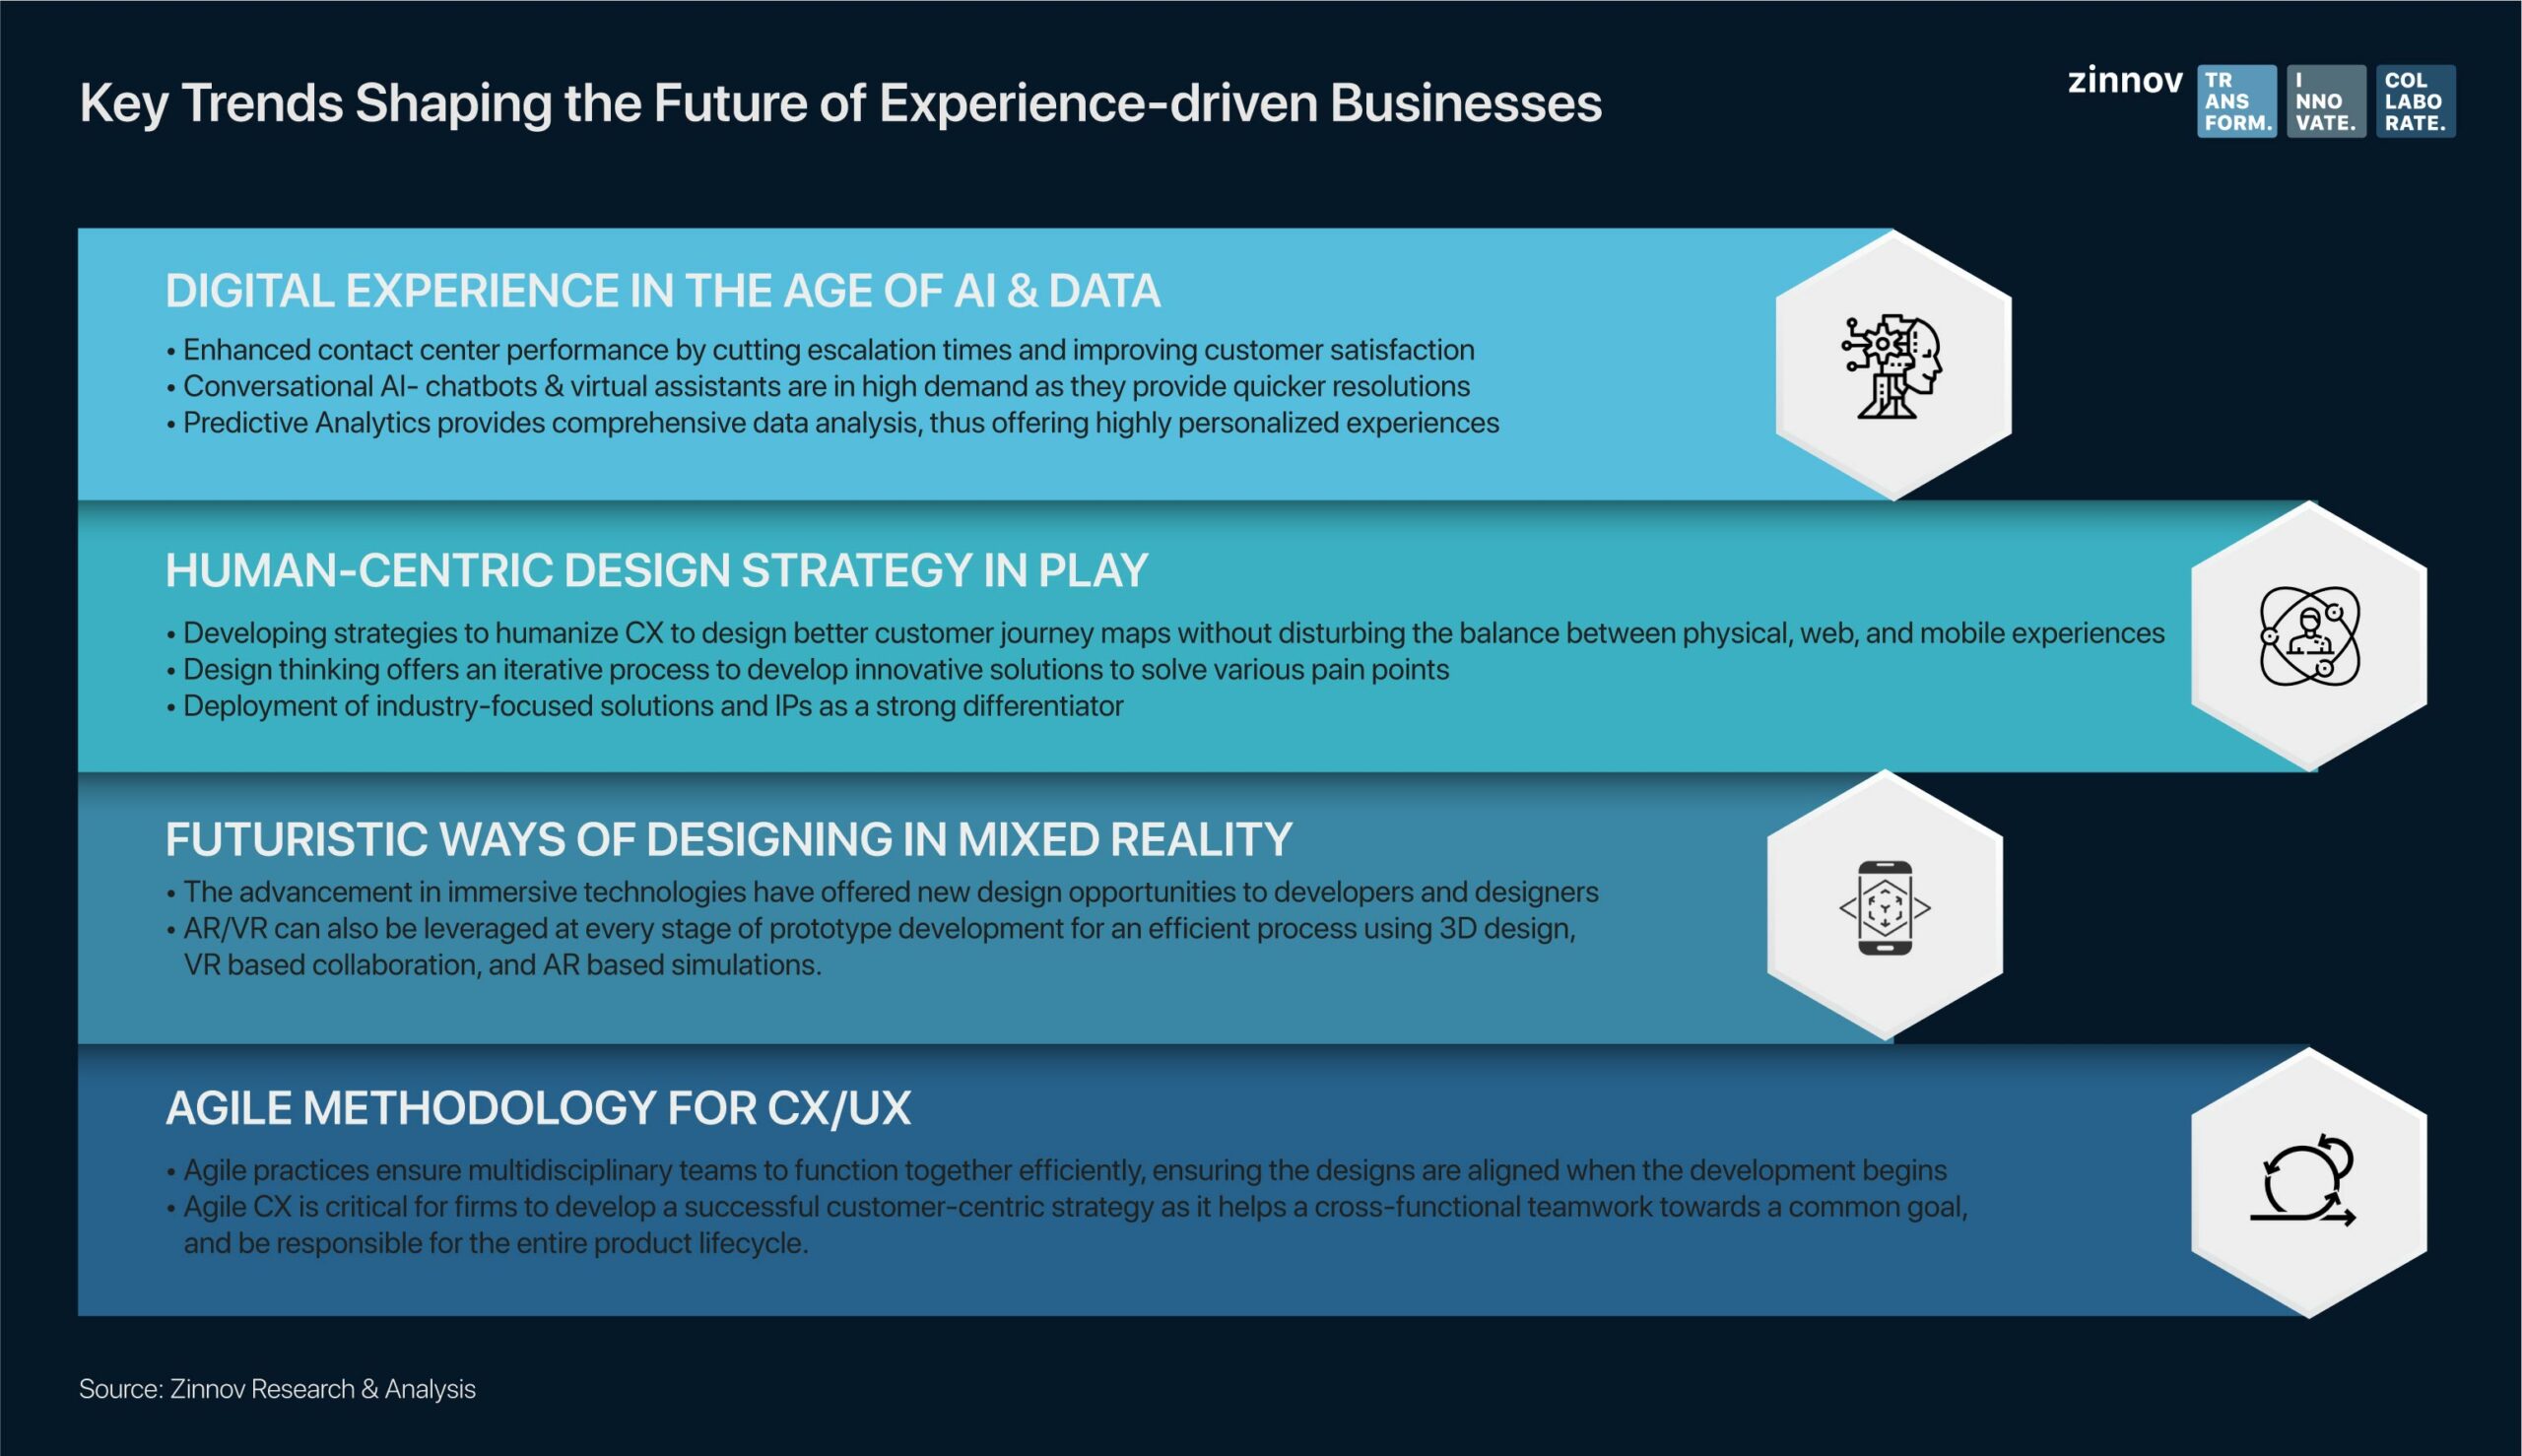 Key trends shaping the future of experience driven businesses